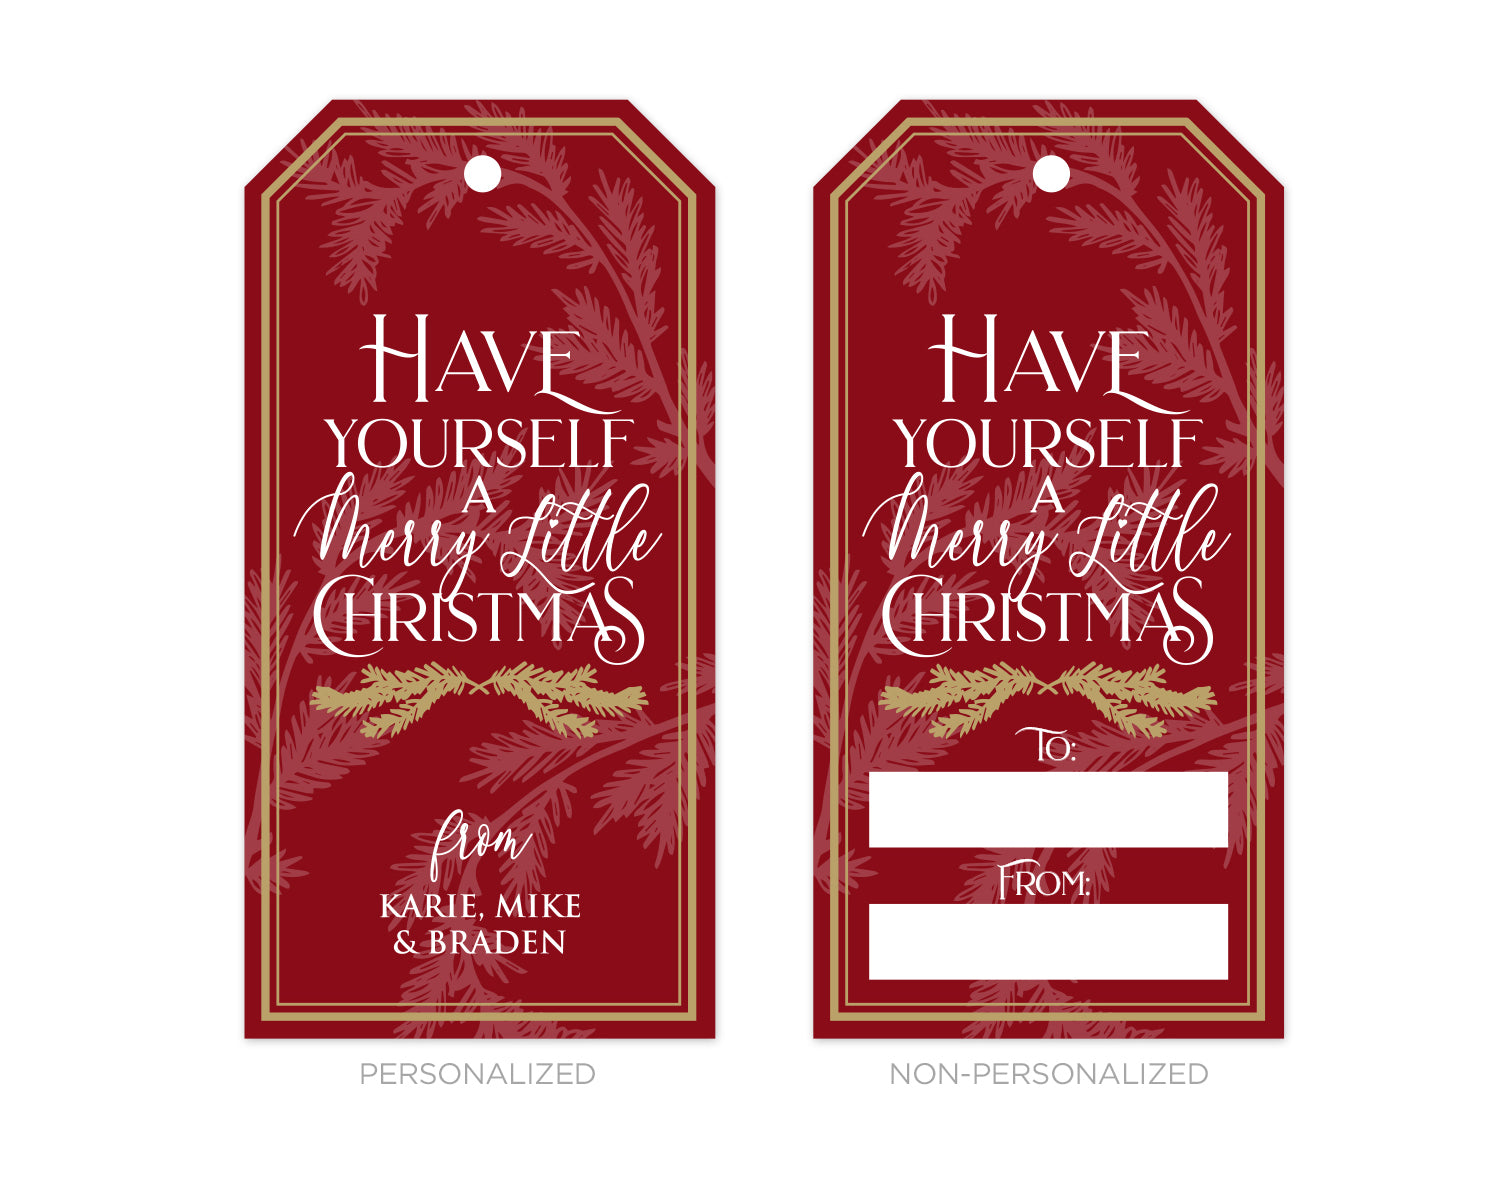 Personalized Burgundy and Gold Christmas Gift Tags